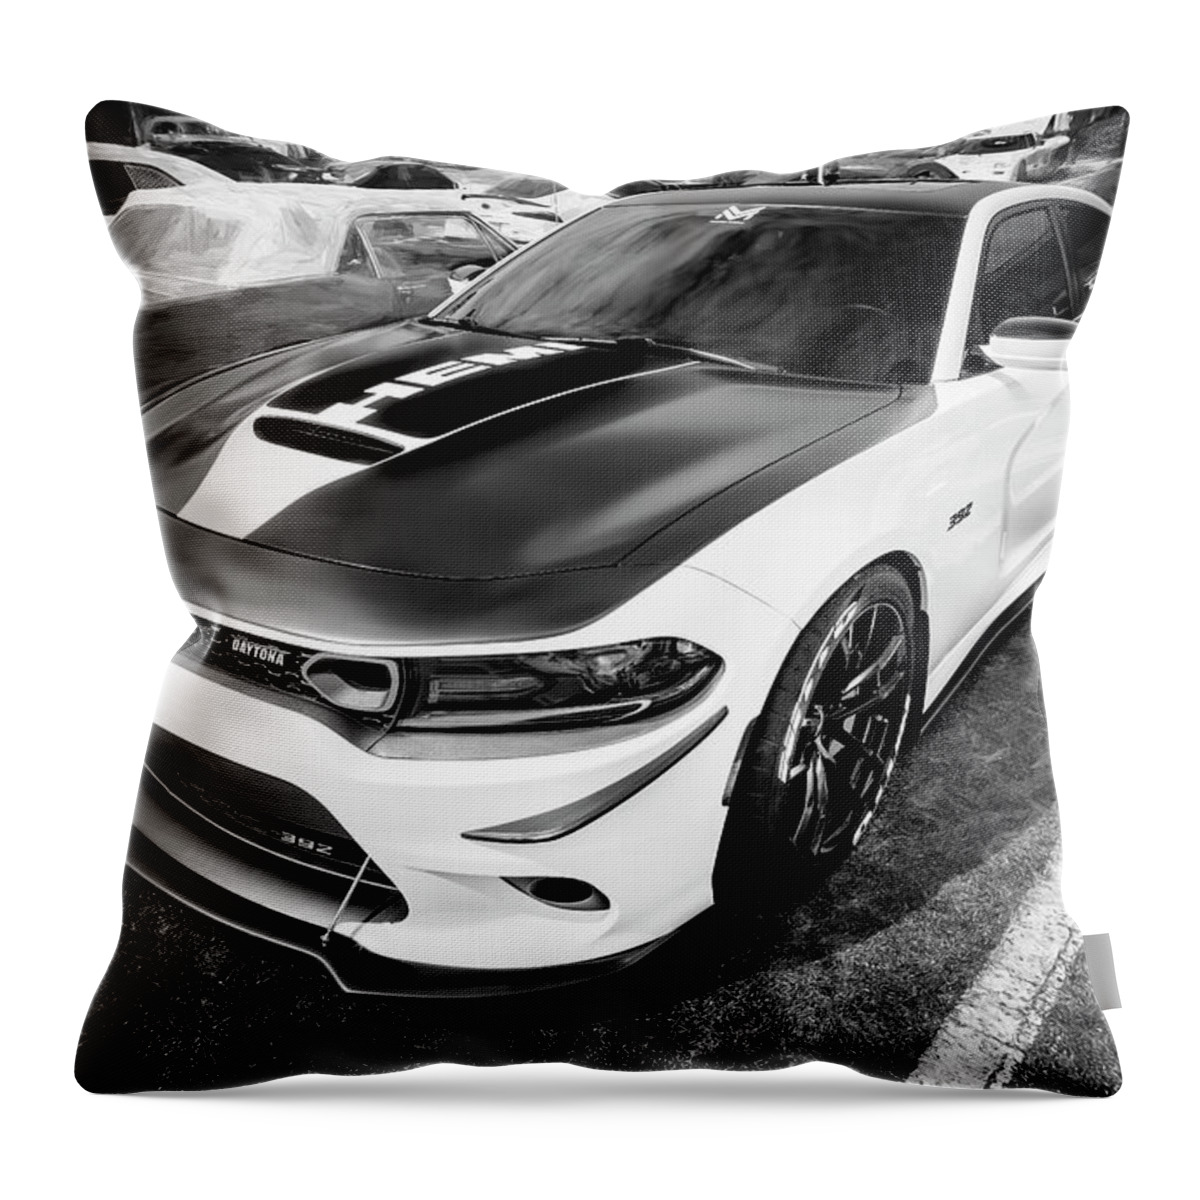 2019 Dodge Charger Scatpack Daytona 392 6.4 L Throw Pillow featuring the photograph 2019 Dodge Charger Scatpack SRT Daytona 392 6.4 L X108 by Rich Franco